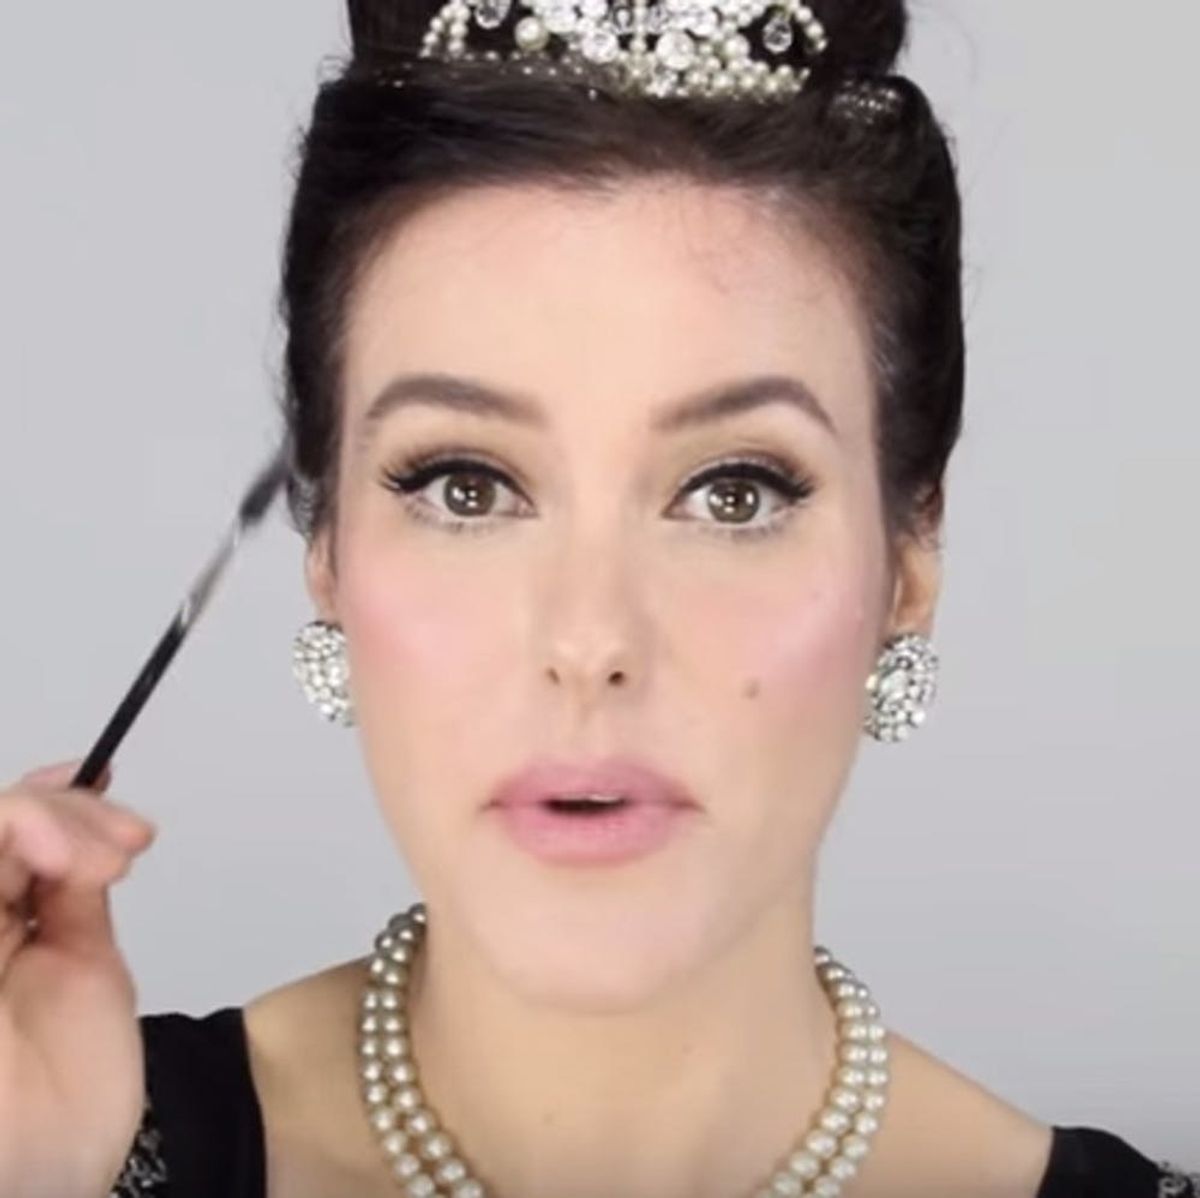 12 Makeup Tutorials Inspired by Your Favorite Movie Characters